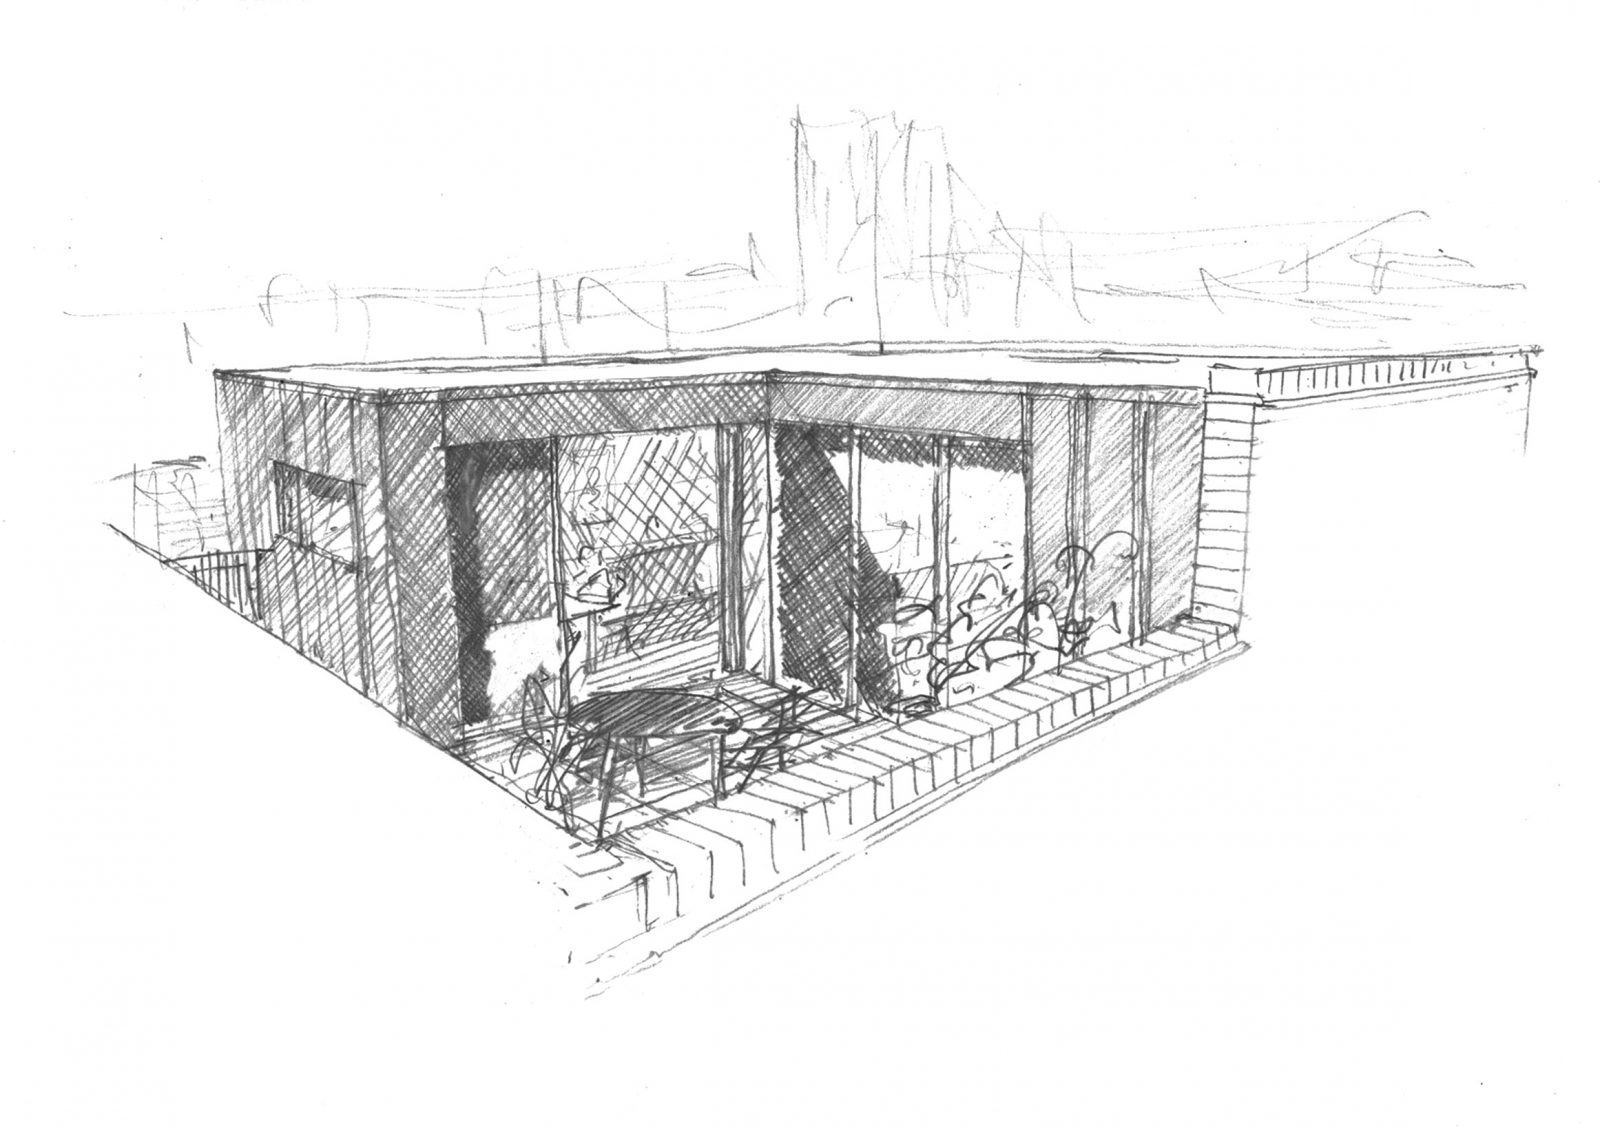 Sketch of extension proposed